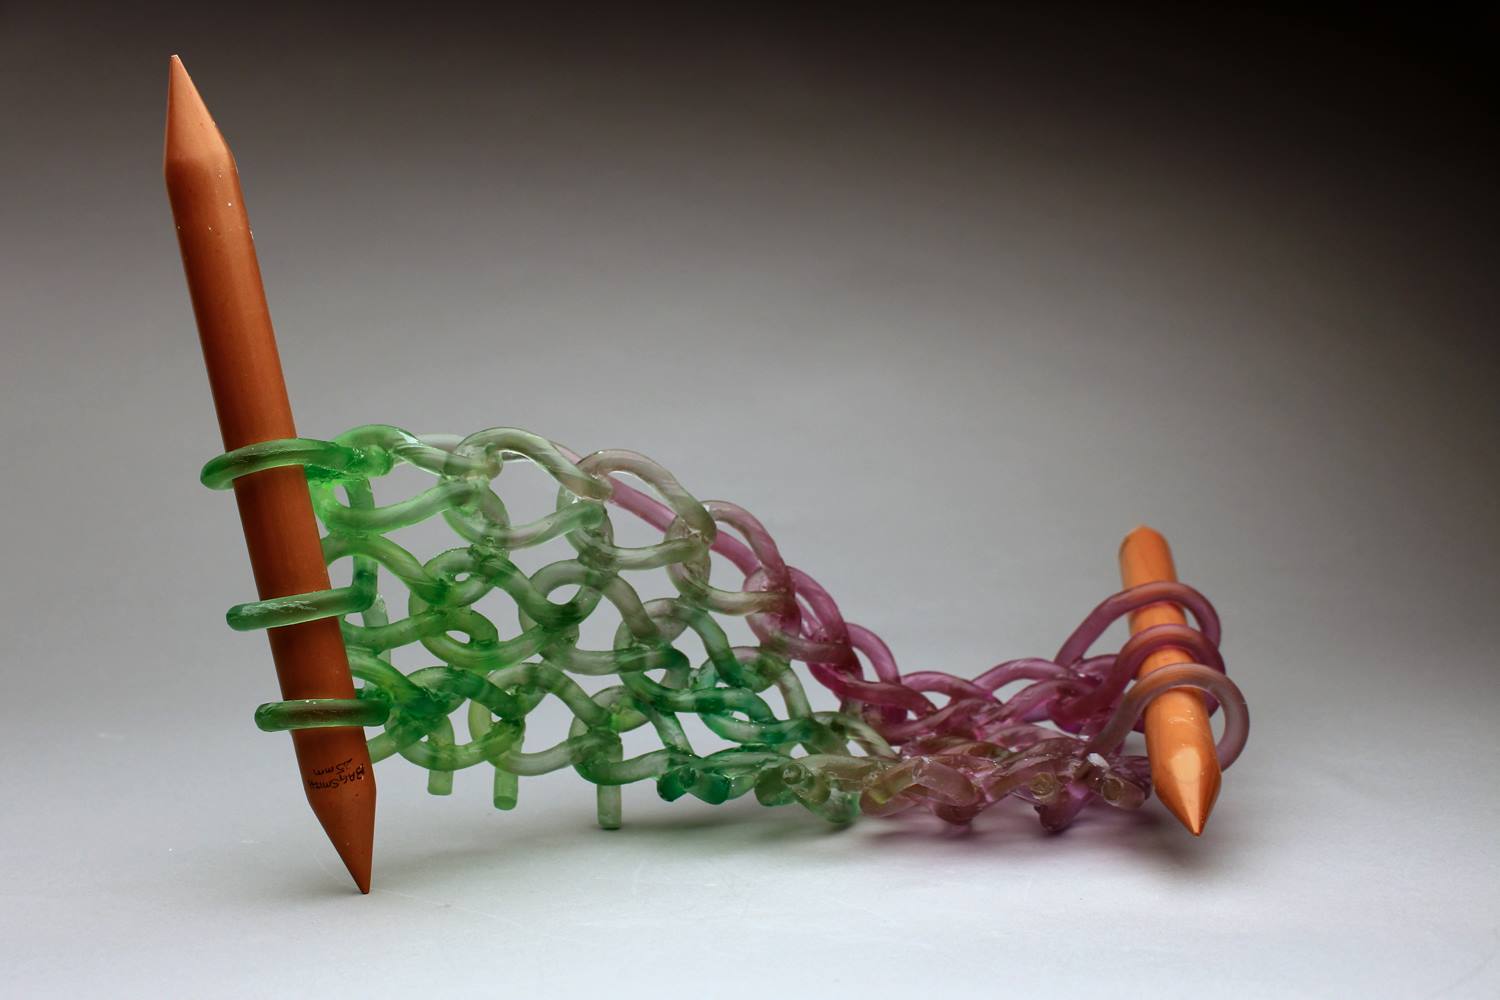 'Speak Softly and Carry a Big Stitch' ... A New Knitted Glass Sculpture From Carol Milne